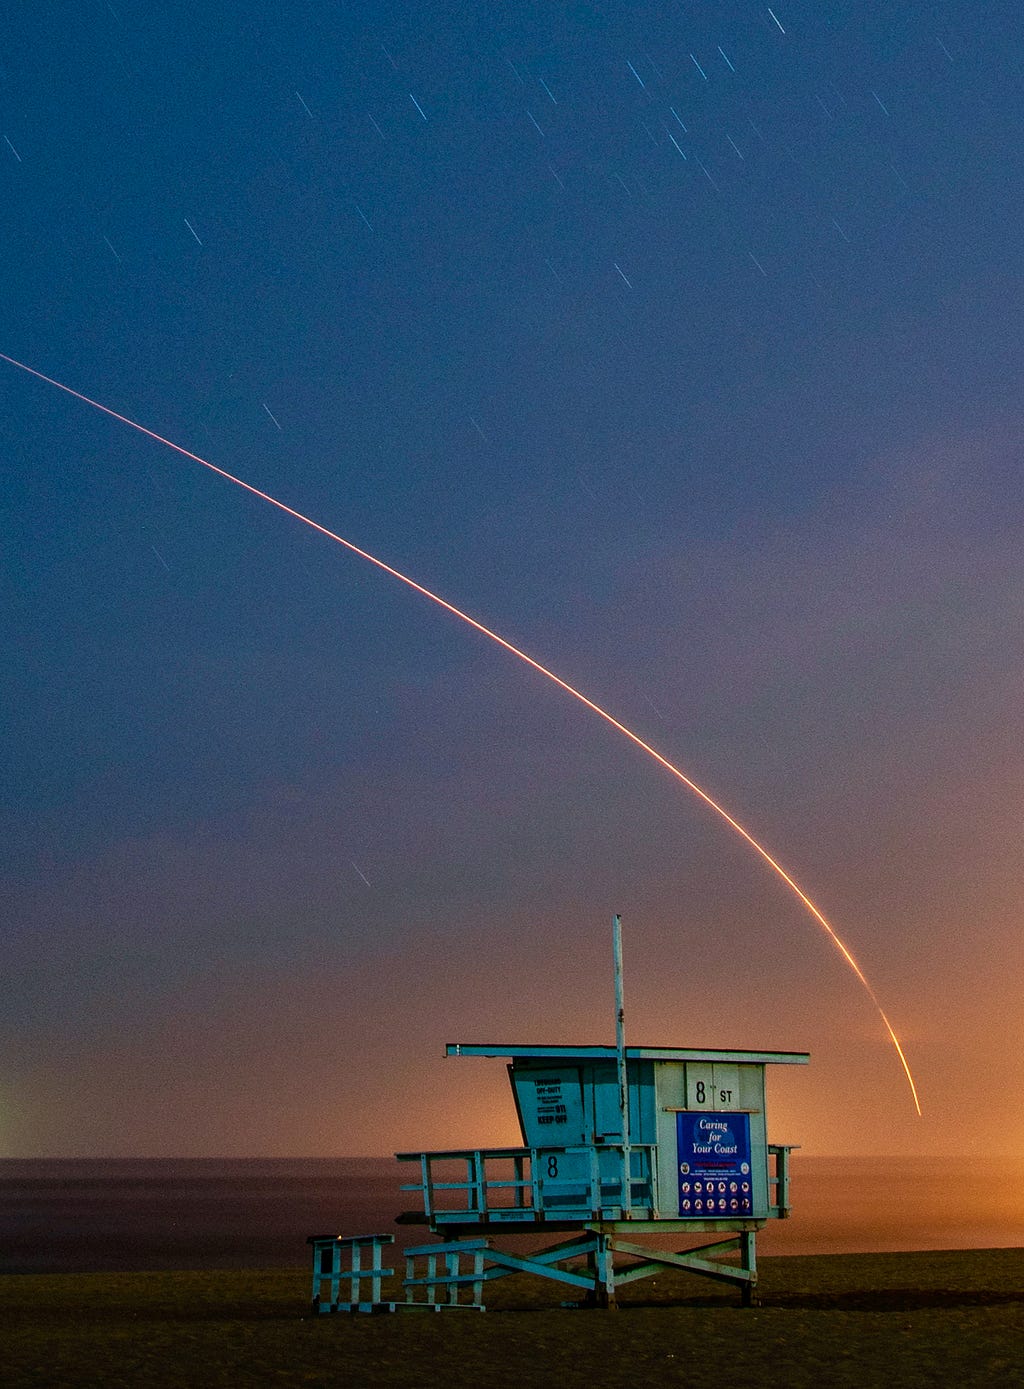 Mars Insight launched from Vandenberg Air Force Base, California, May 5th, 2018. View from Manhattan Beach, Californ